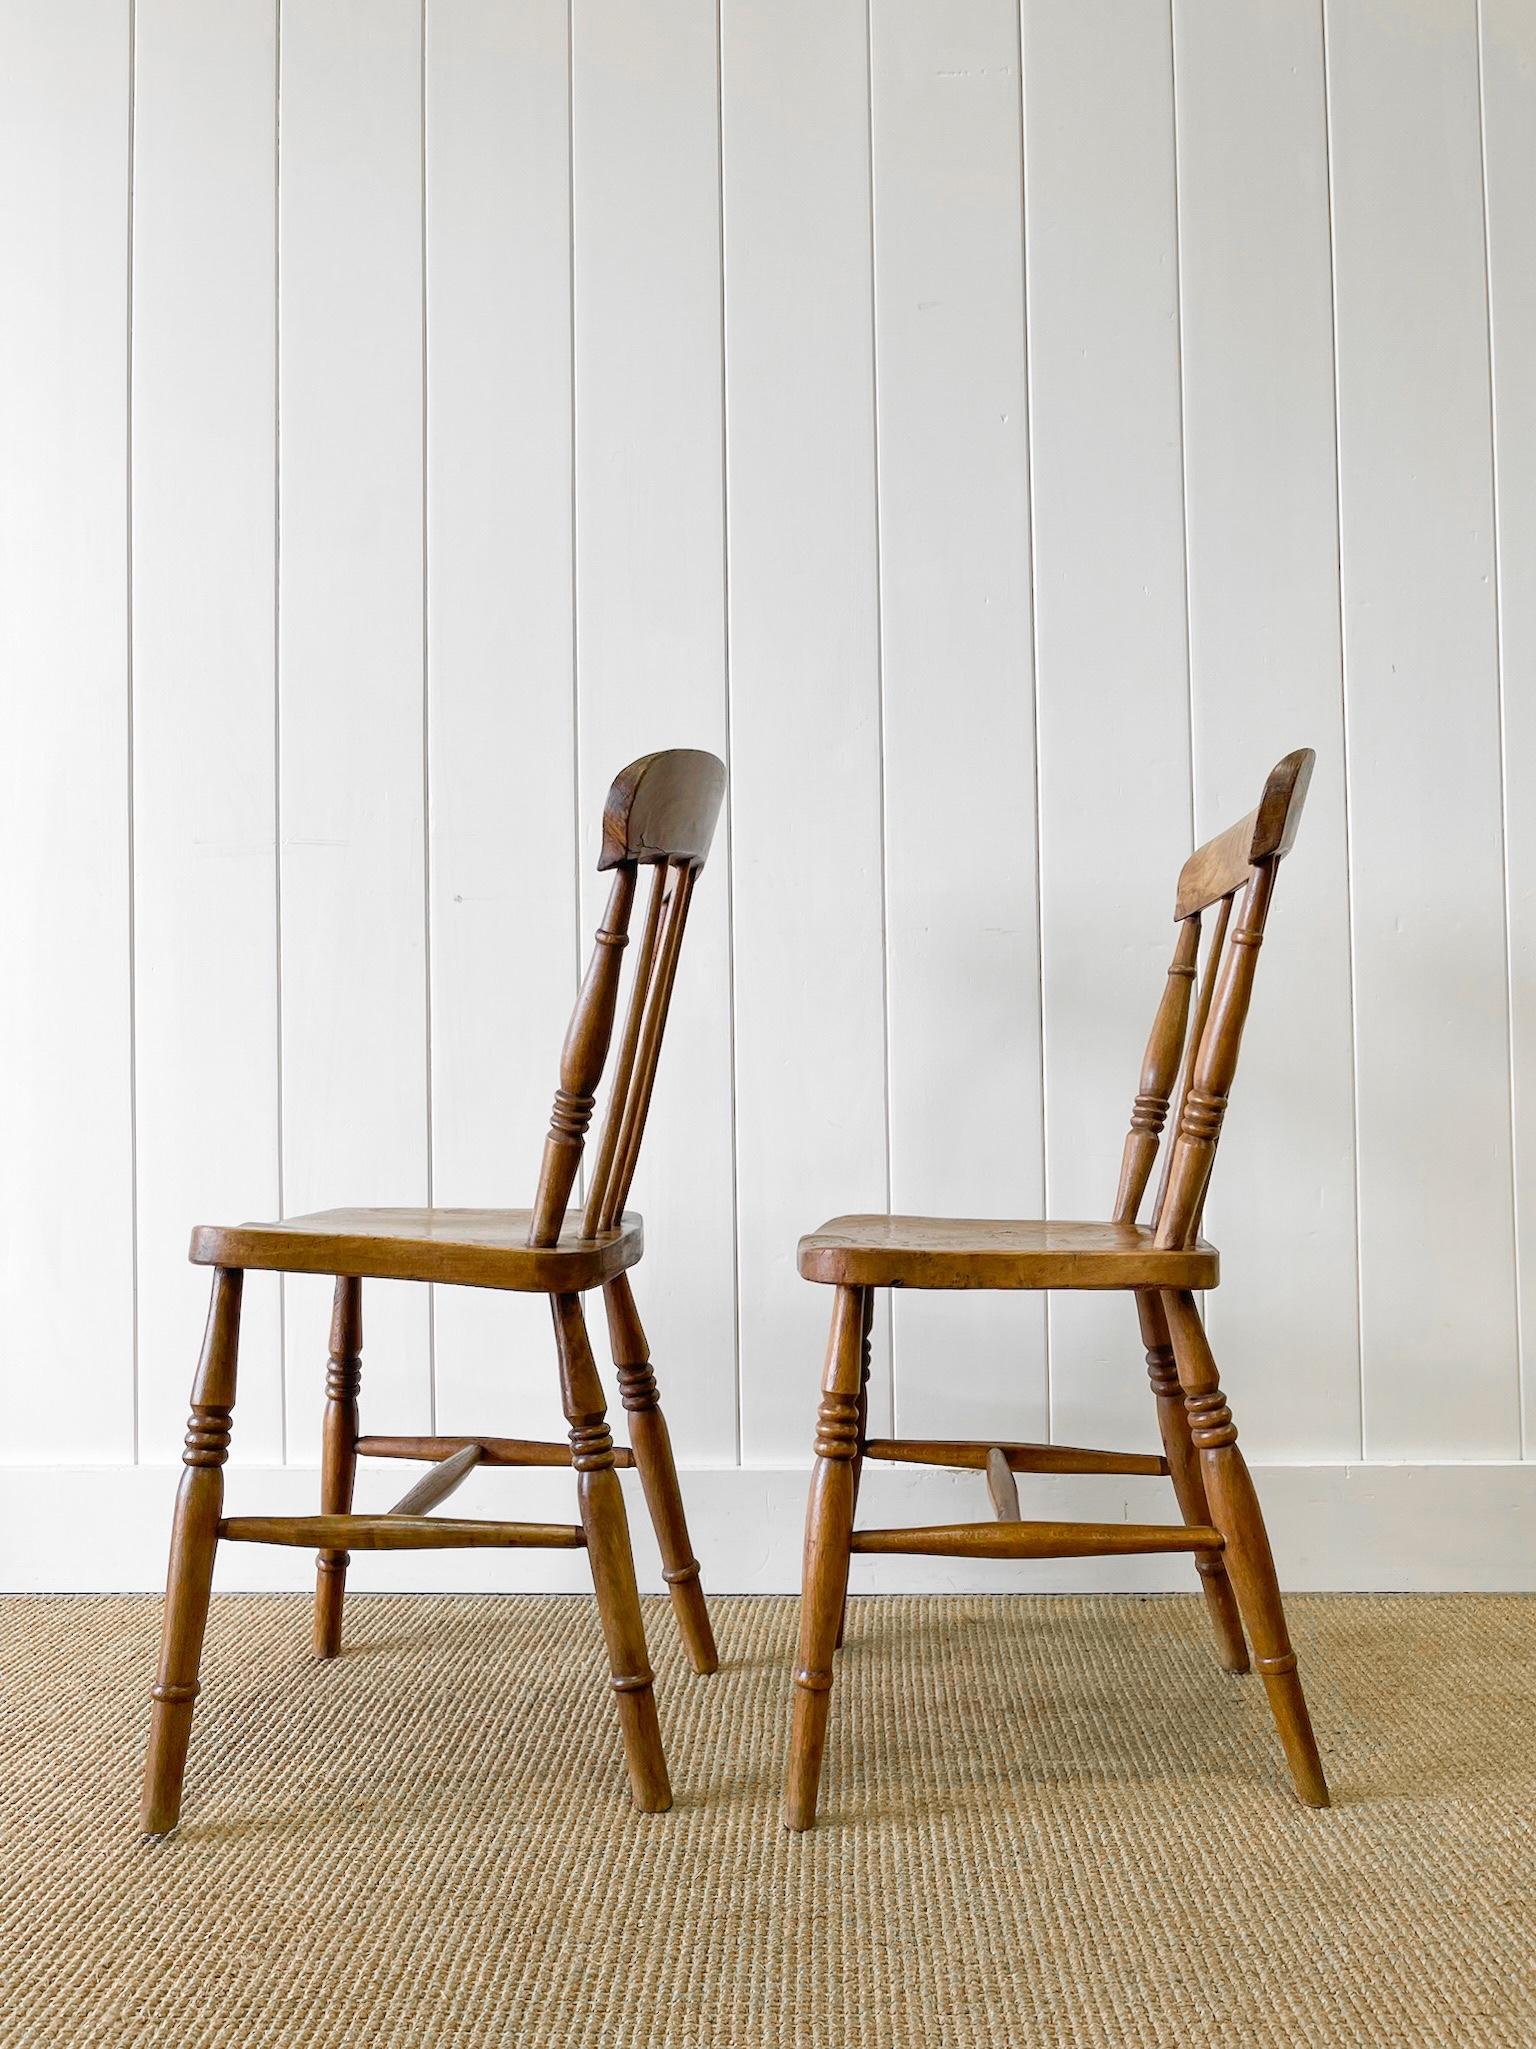 An Antique Set of 4 Early 19th Century Stick Back Chairs For Sale 9